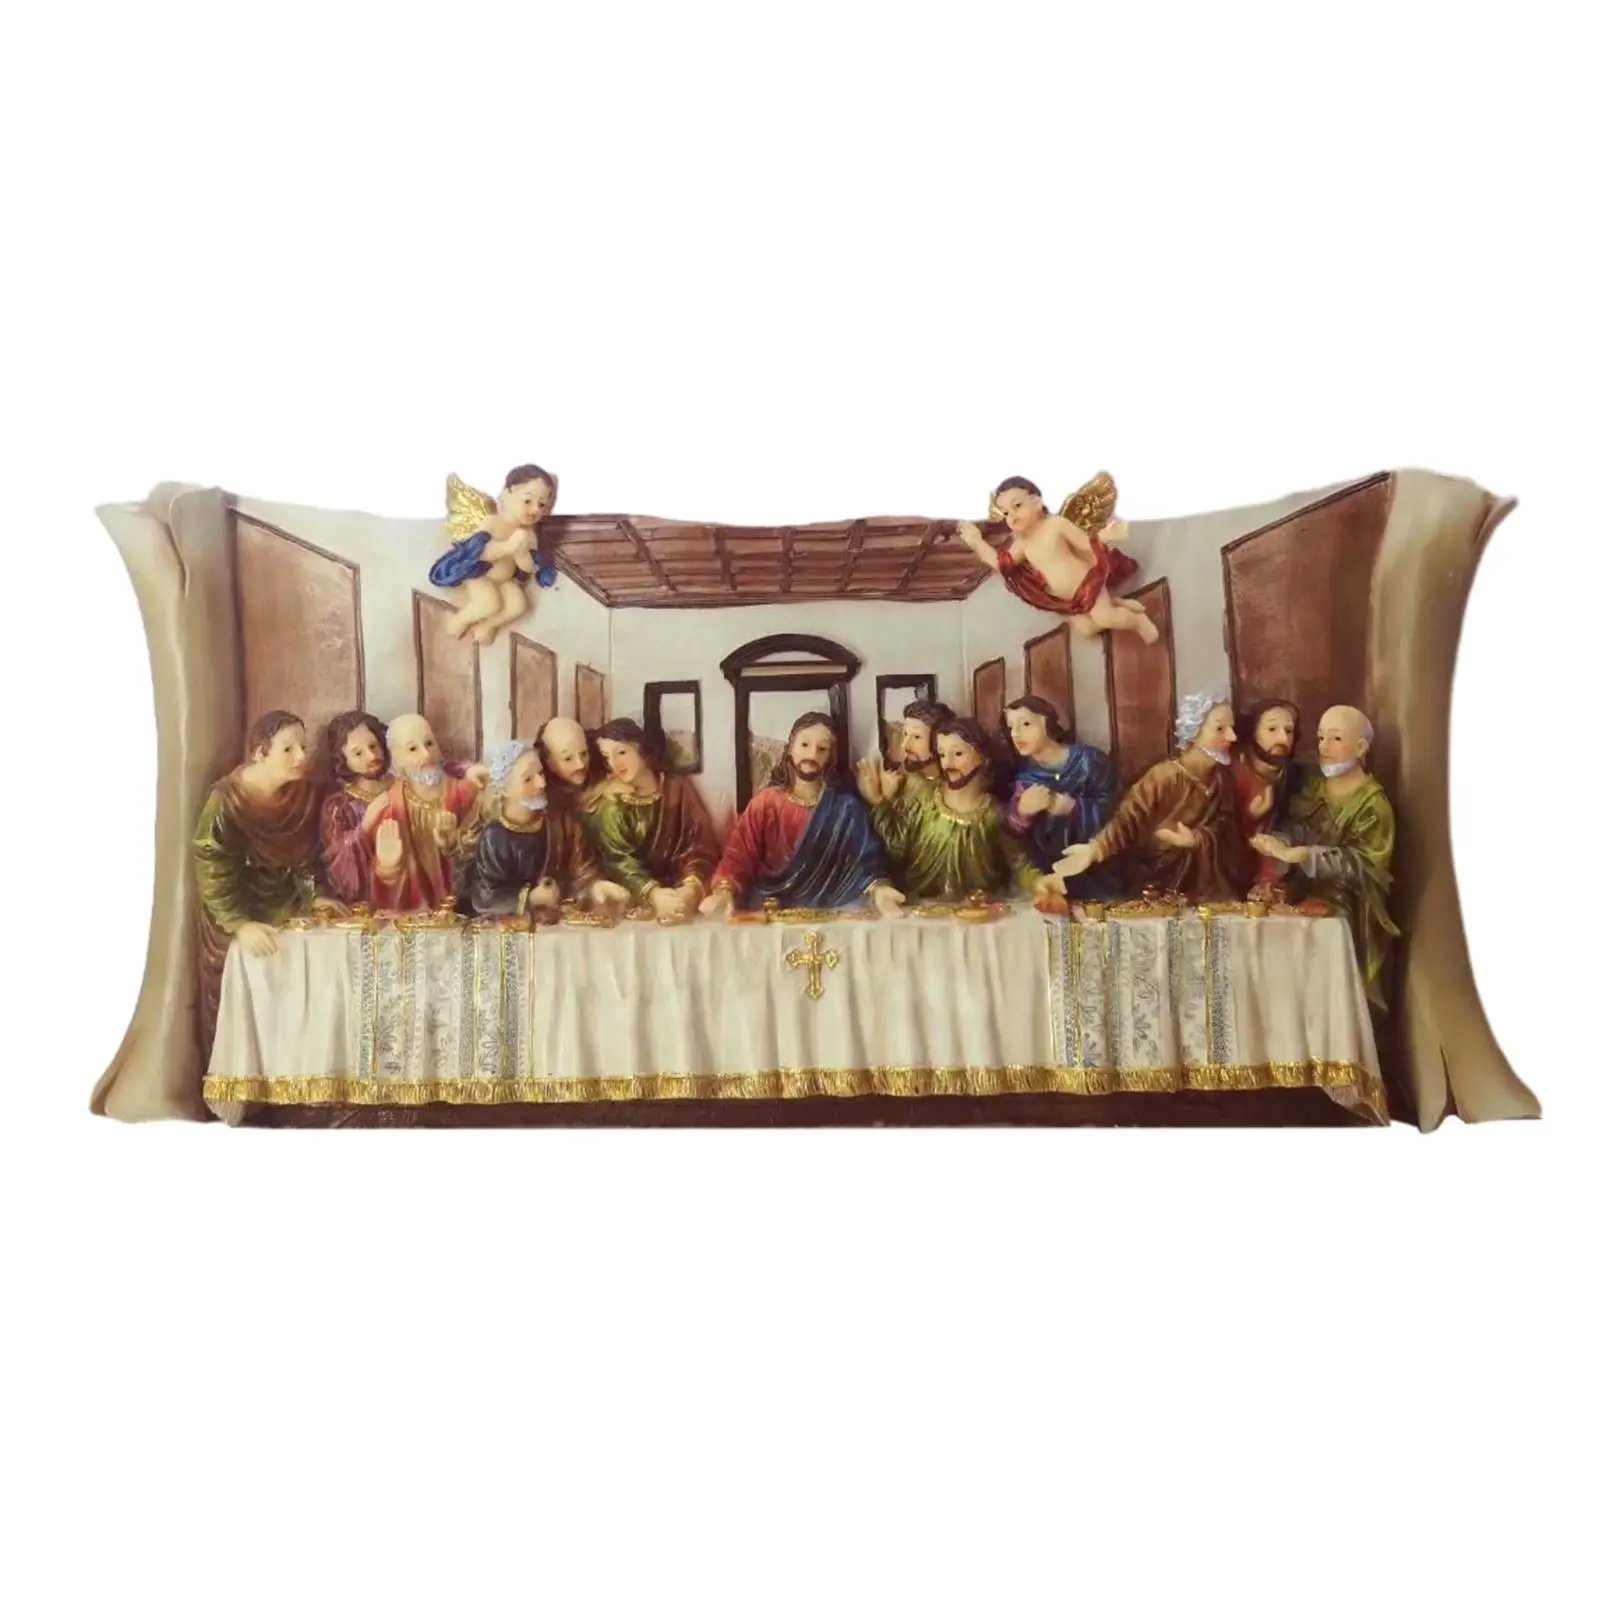 Last Supper Figures Home Decor Office Decoration Decorative Religious Statue for Living Room Home Office Bedroom Religious Gift